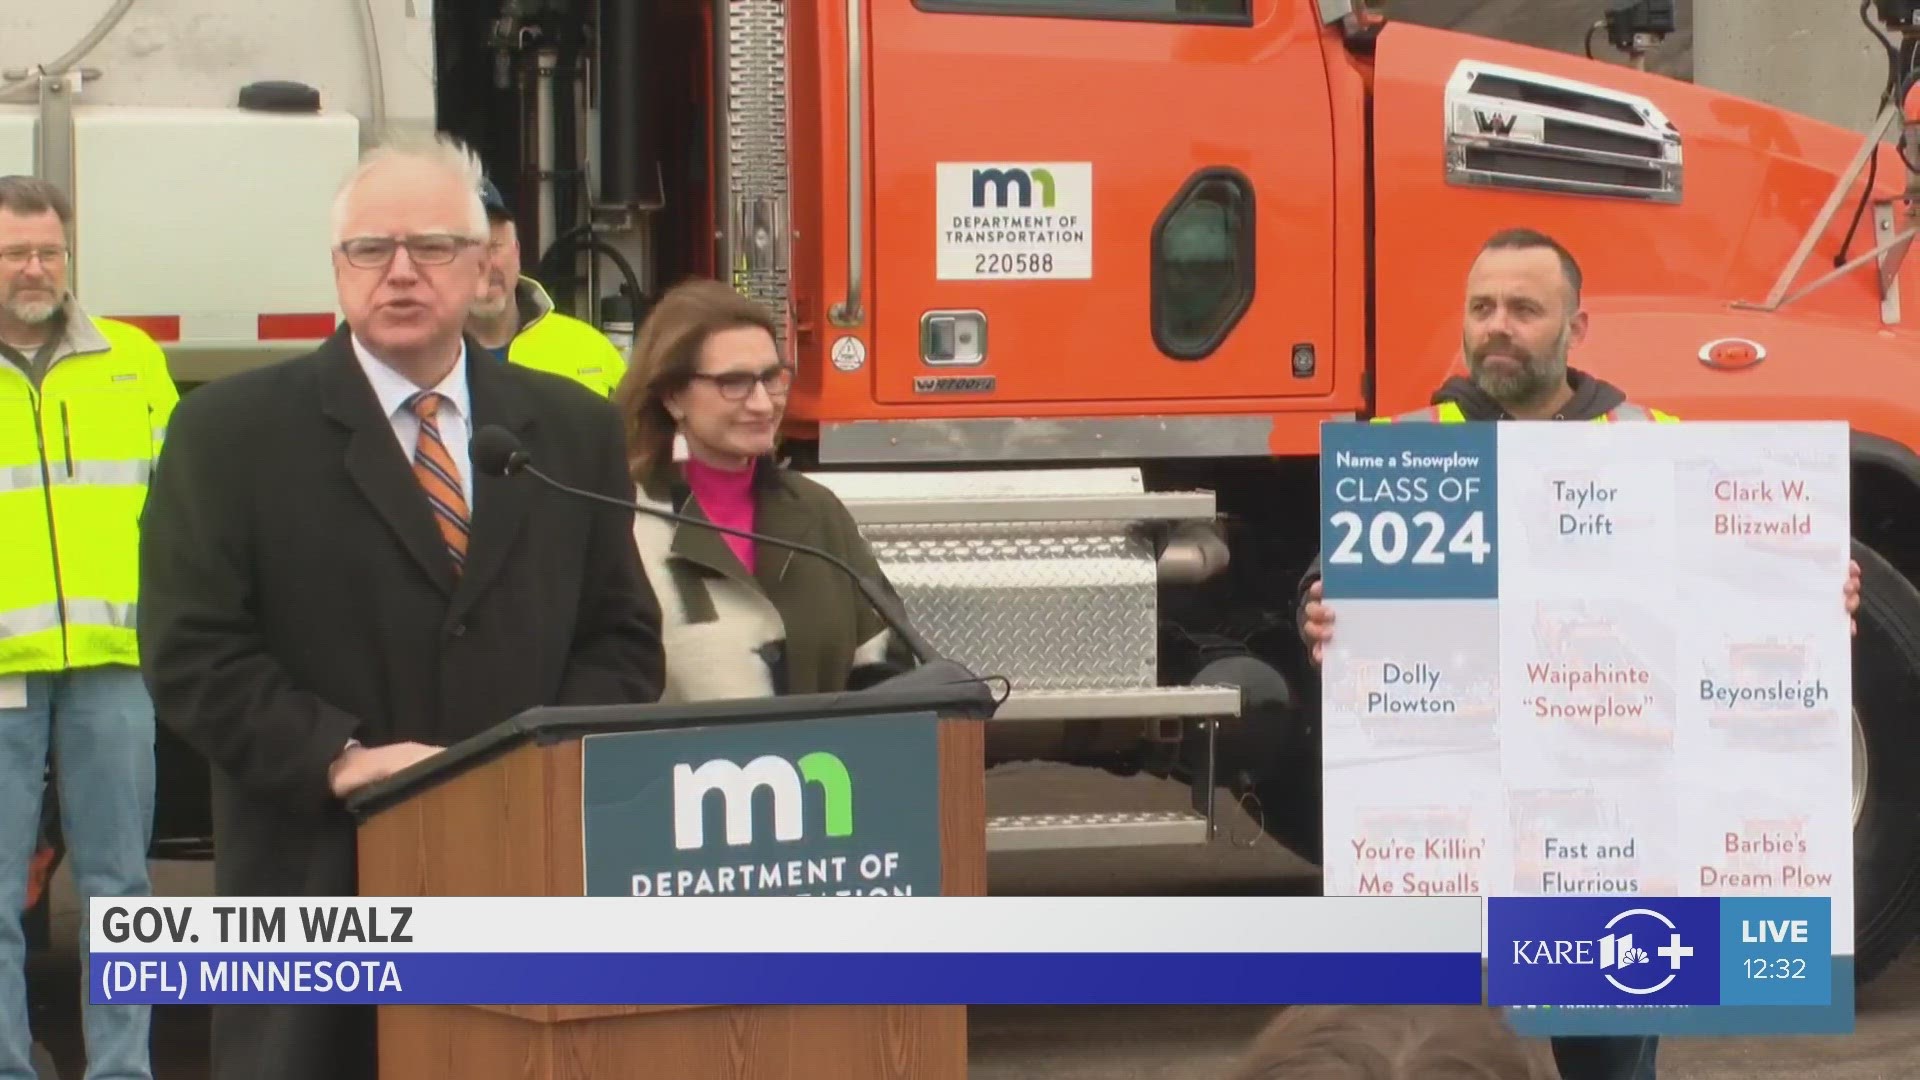 Gov. Tim Walz had the honor of taking the wraps off the eight names chosen as winners of the 2024 "Name a Snowplow" contest.